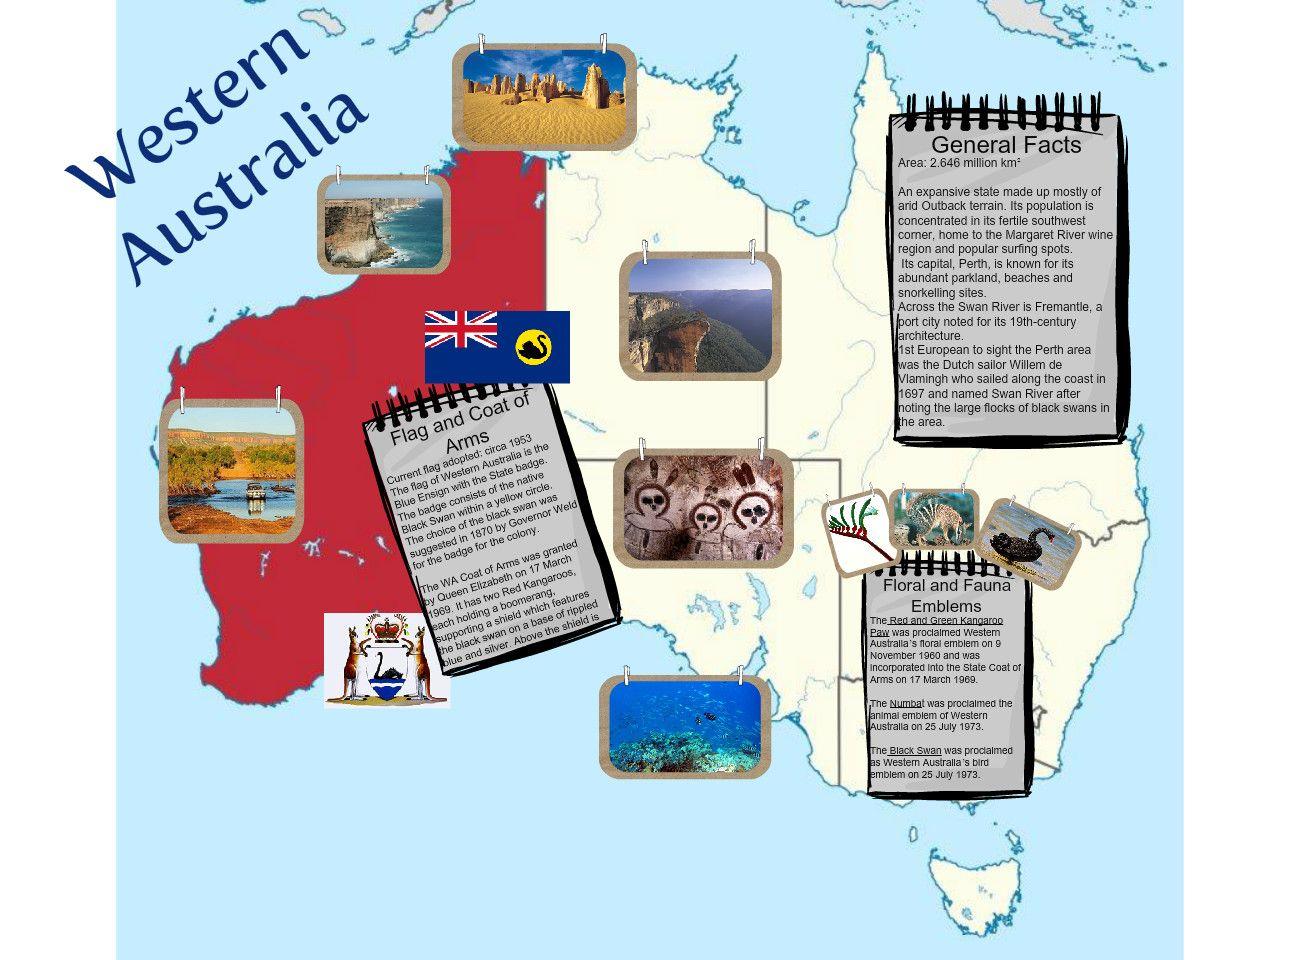 Above Each Other Silver Boomerangs Logo - Western Australia: text, image, music, video. Glogster EDU